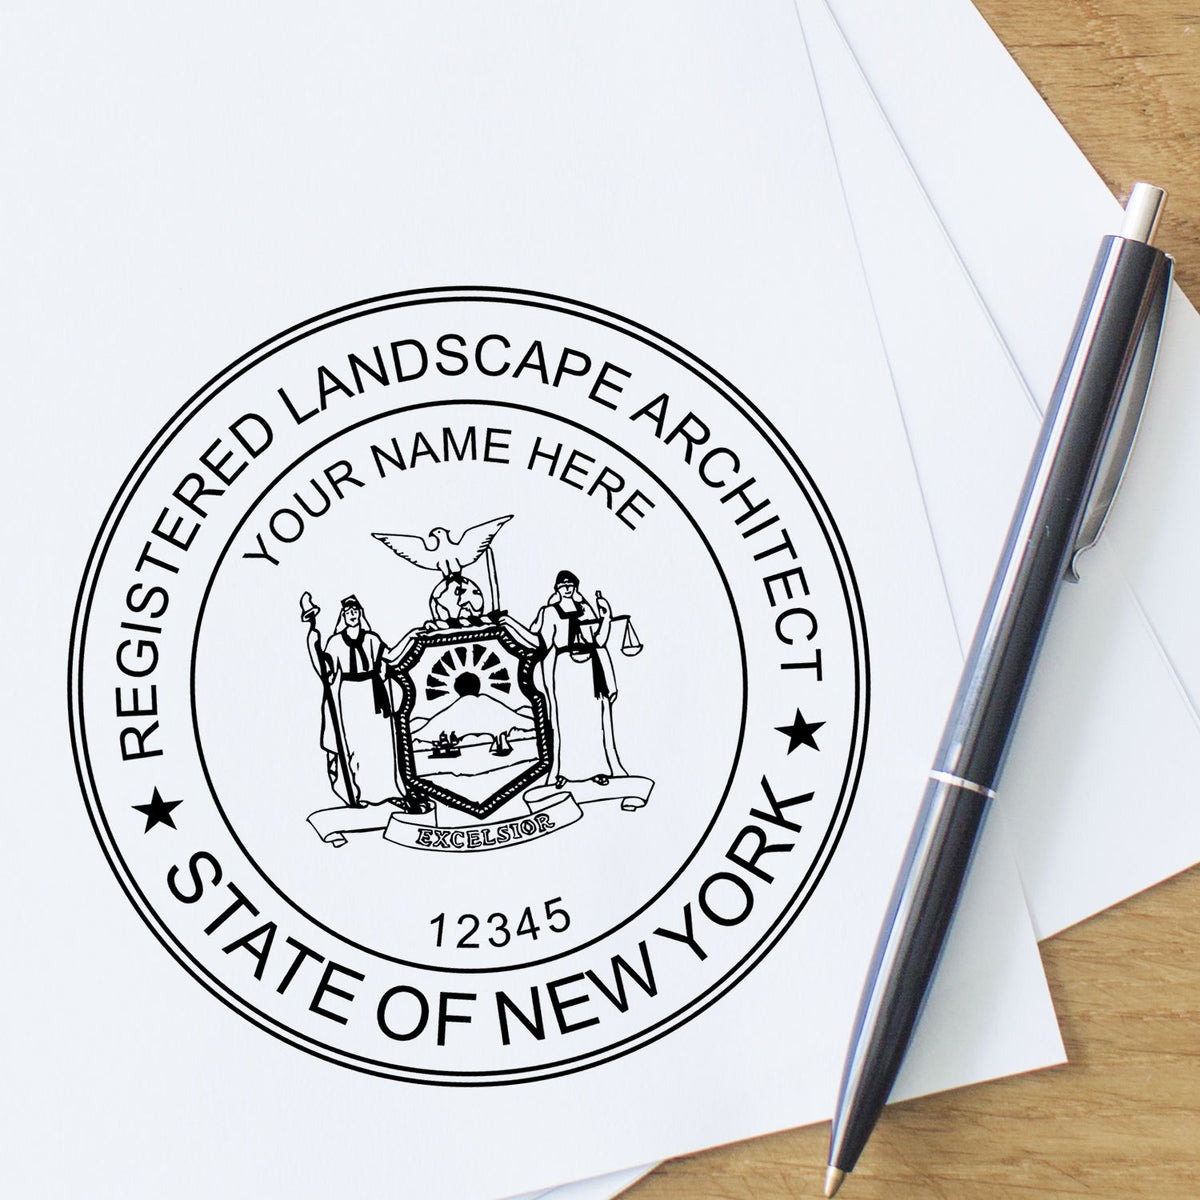 This paper is stamped with a sample imprint of the Premium MaxLight Pre-Inked New York Landscape Architectural Stamp, signifying its quality and reliability.